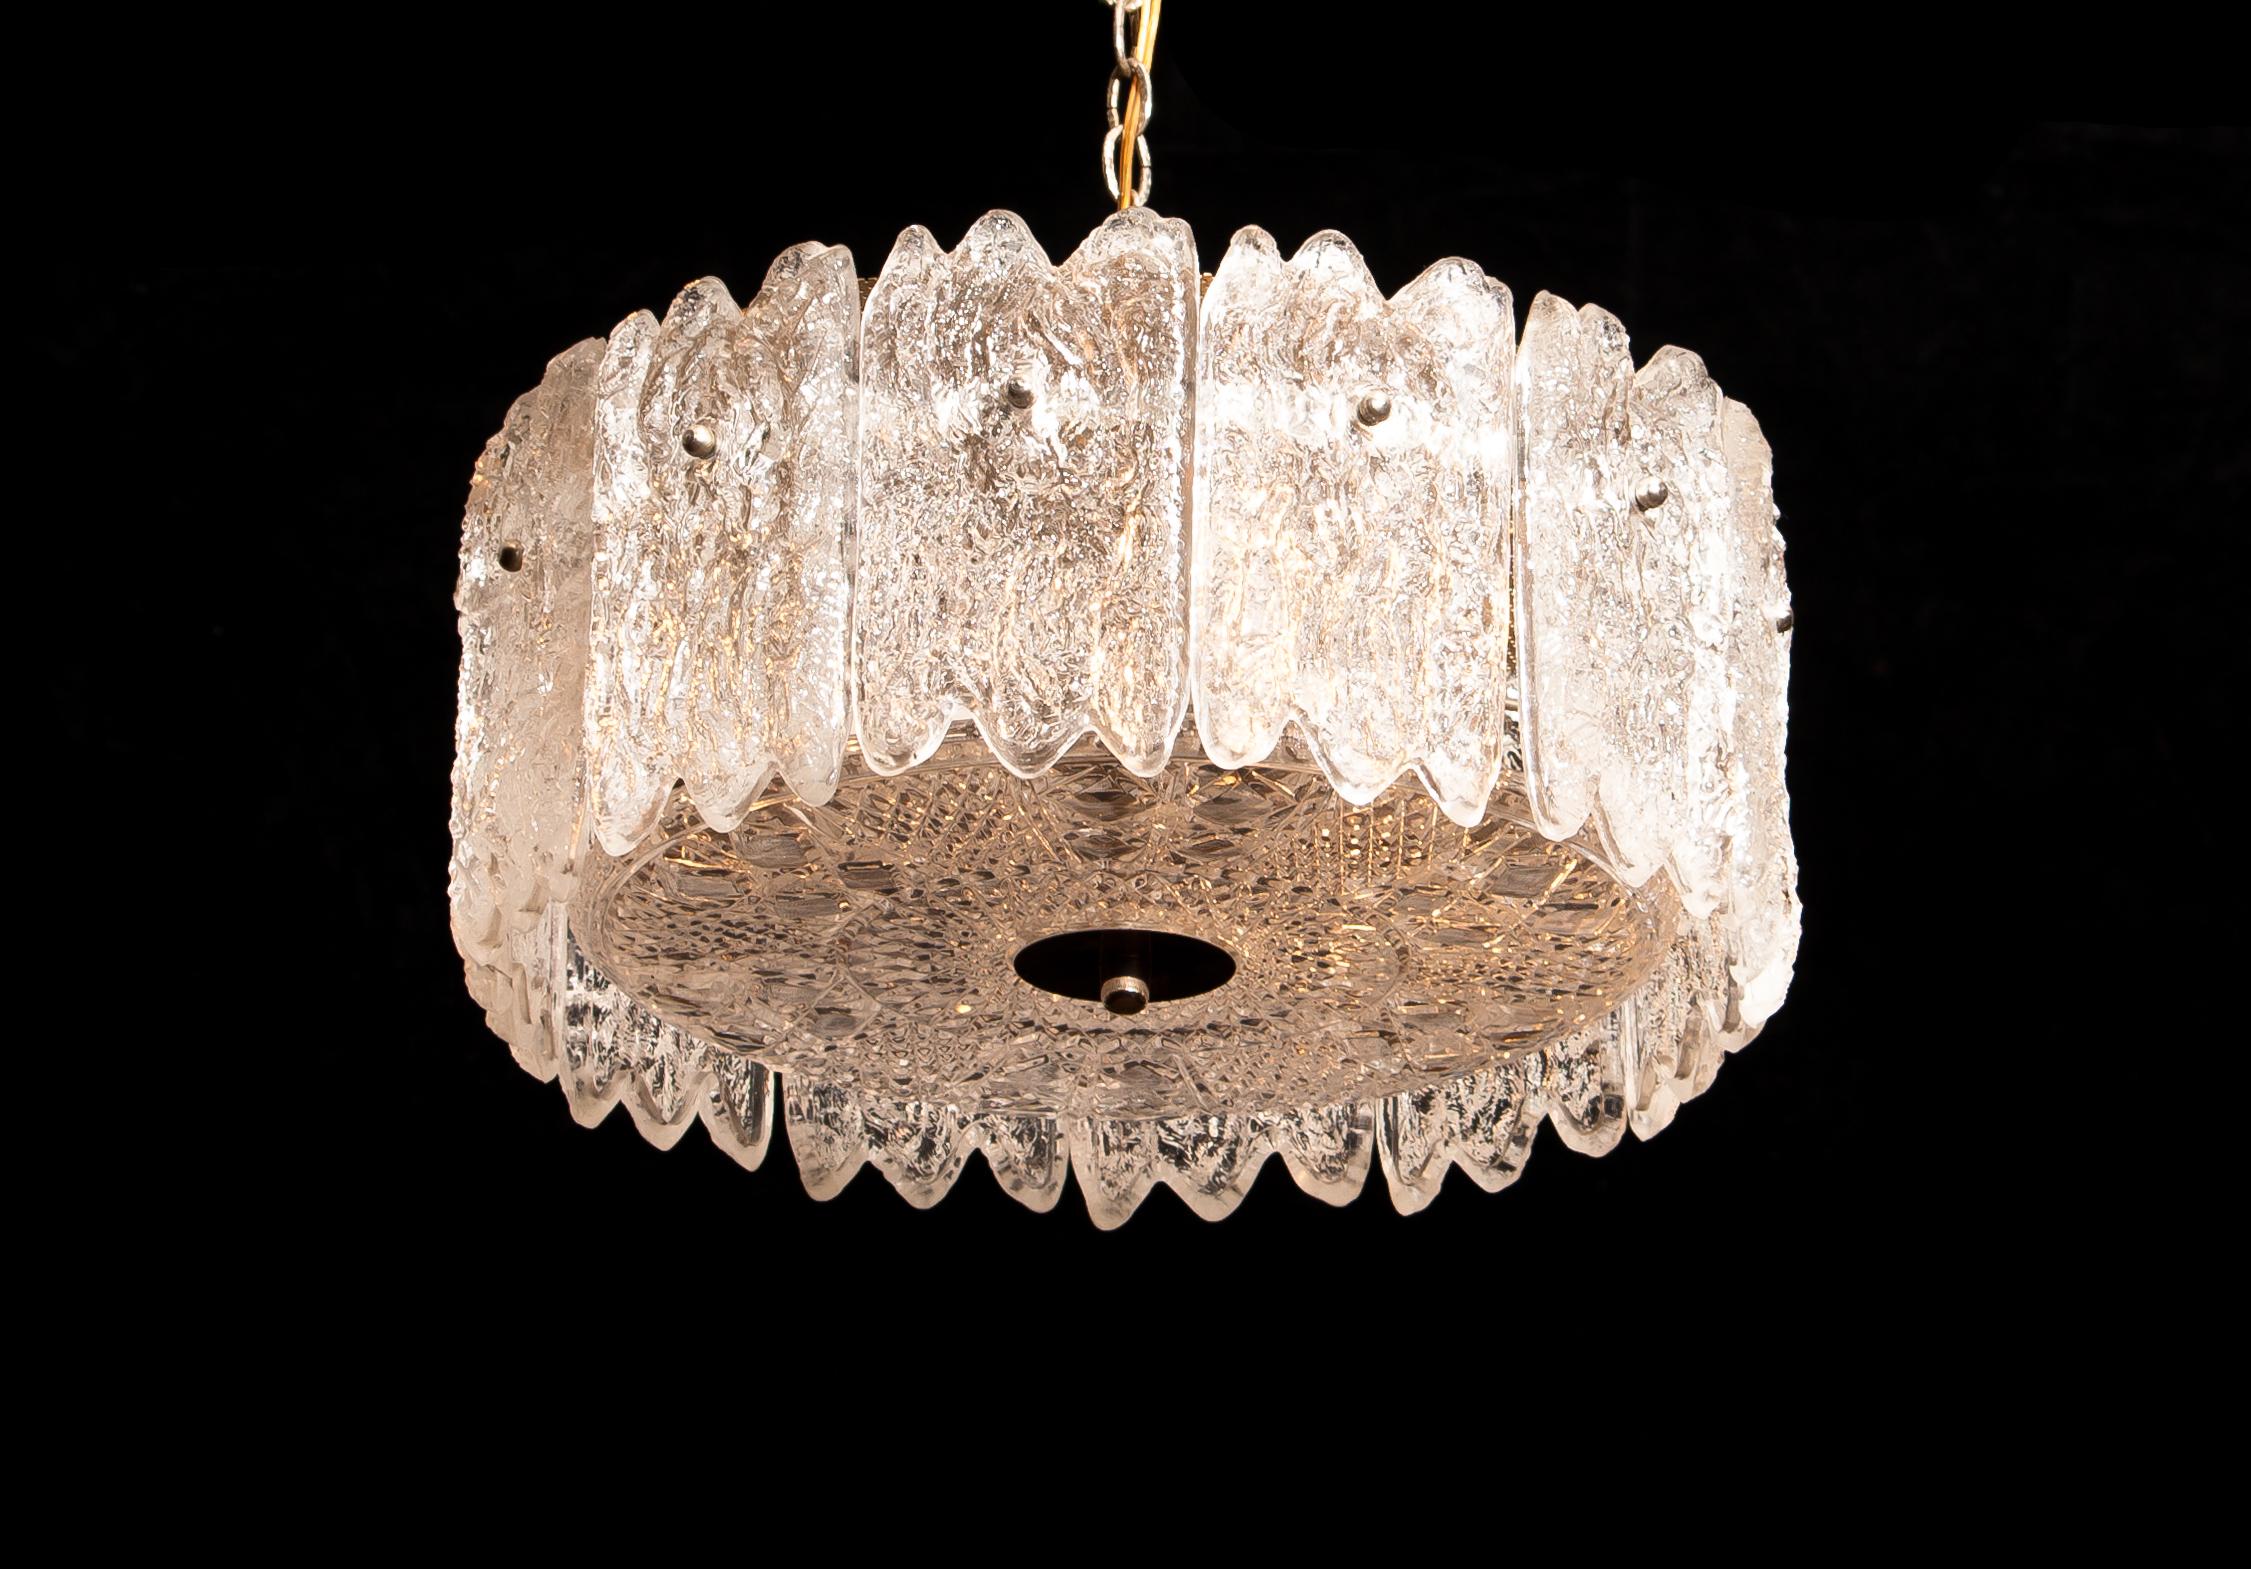 Very beautiful hanging lamp designed by Carl Fagerlund for Orrefors Sweden.
This lamp is build-up with lovely 'ice-sculptures' crystal elements.
The total height of the lamp is 105 cm but is adjustable to a shorter height.
It is in wonderful